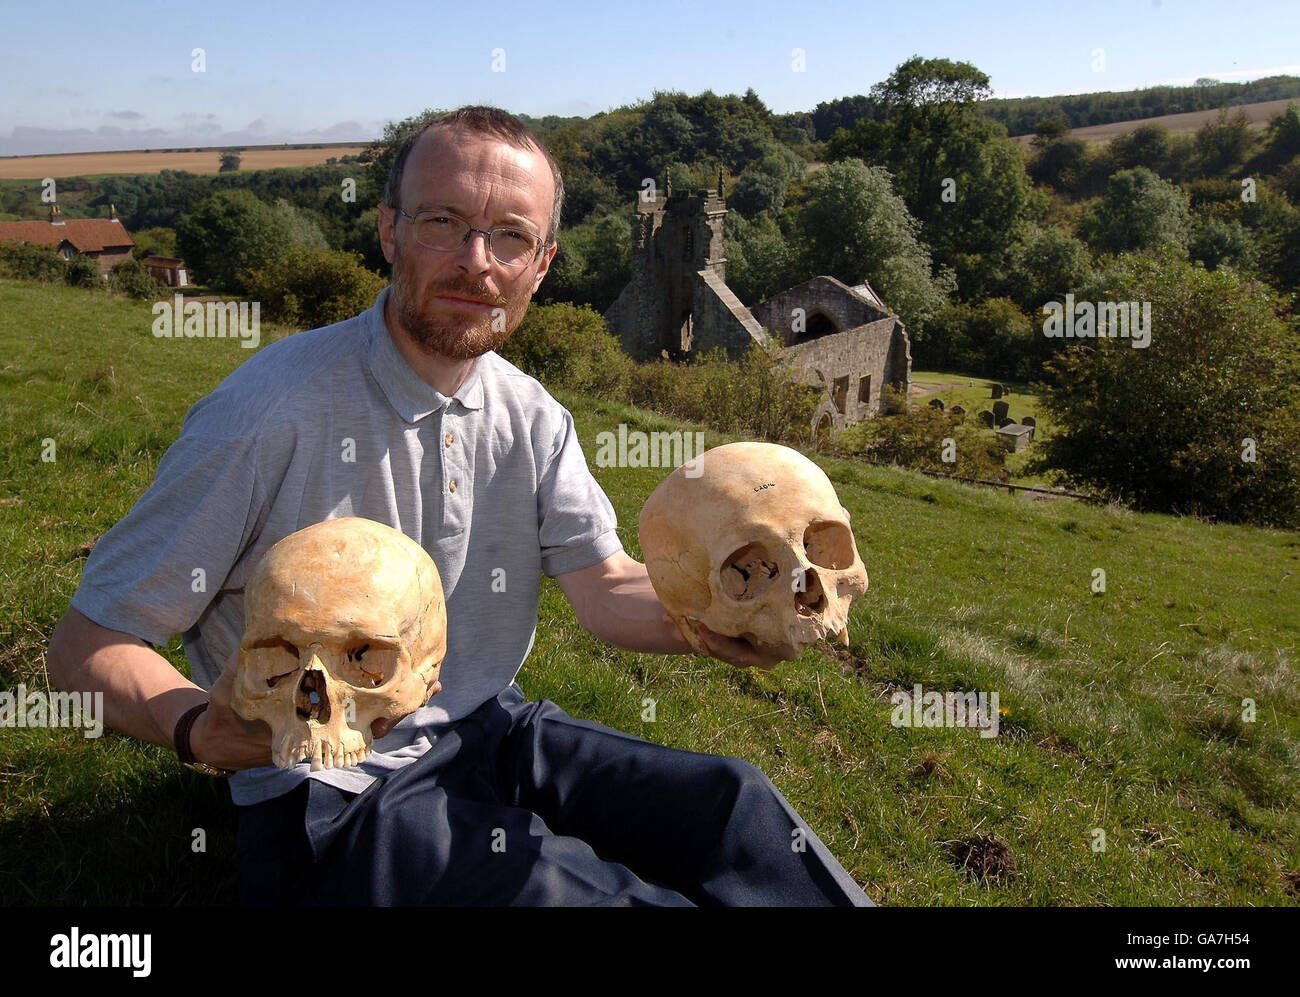 Simon Mays the English Heritage Skeletal Biologist with a 13th Century skull (left) and a 11th Century skull found at the Wharram Percy deserted village (seen in background) that has revealed a puzzling shift in skull shapes of humans between those centuries. Stock Photo